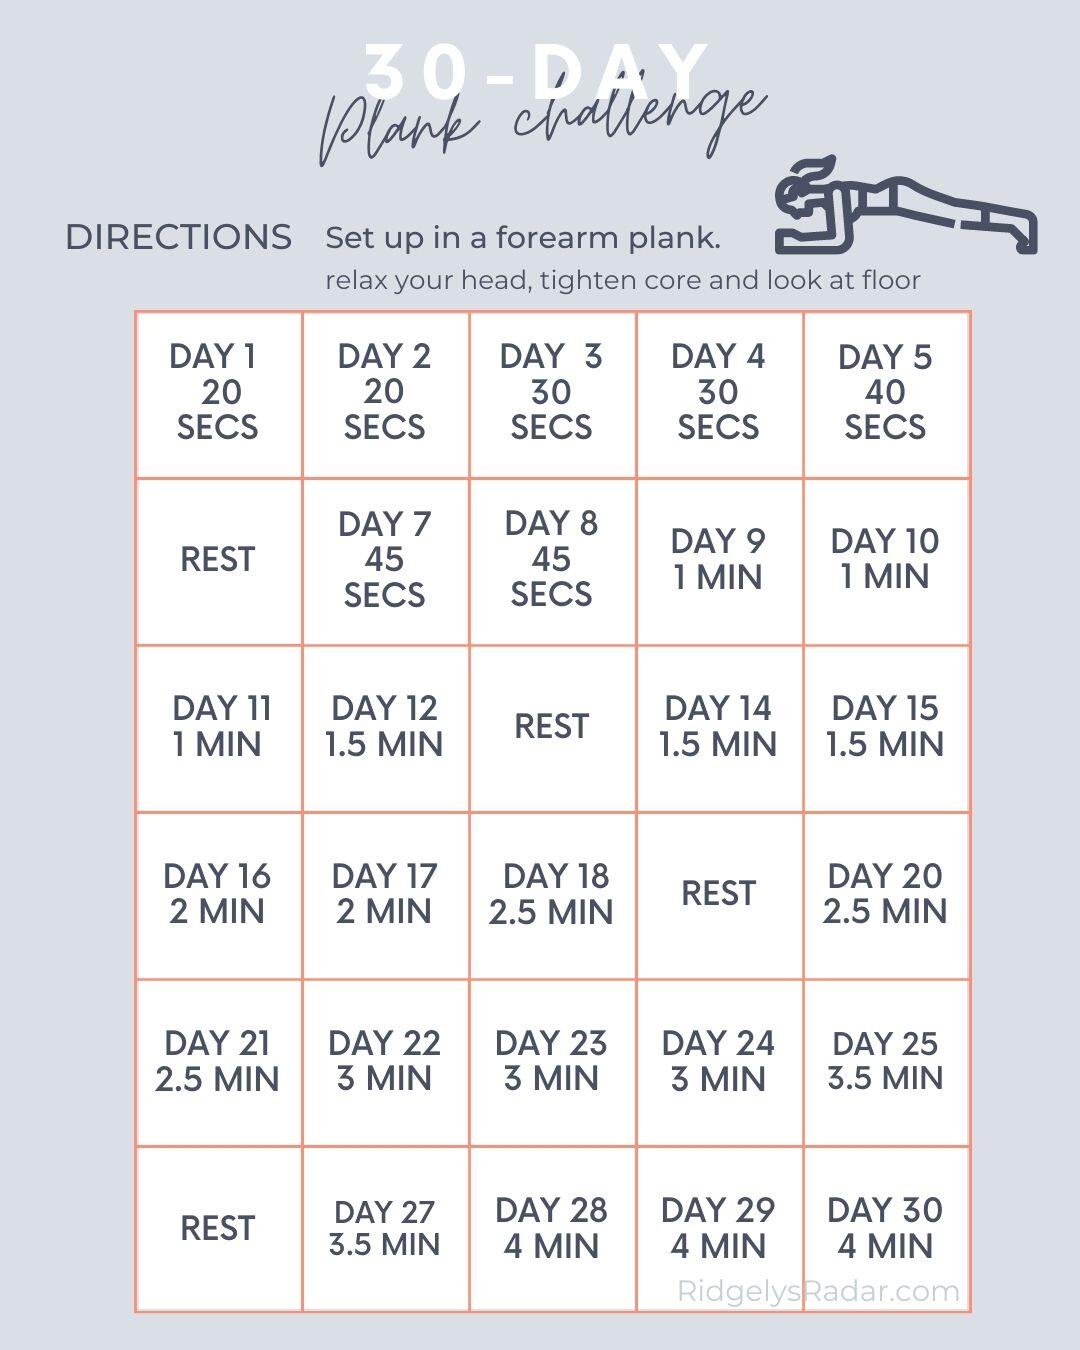 Lets strengthen our core and improve out posture with a 30 Day Plank Challenge!